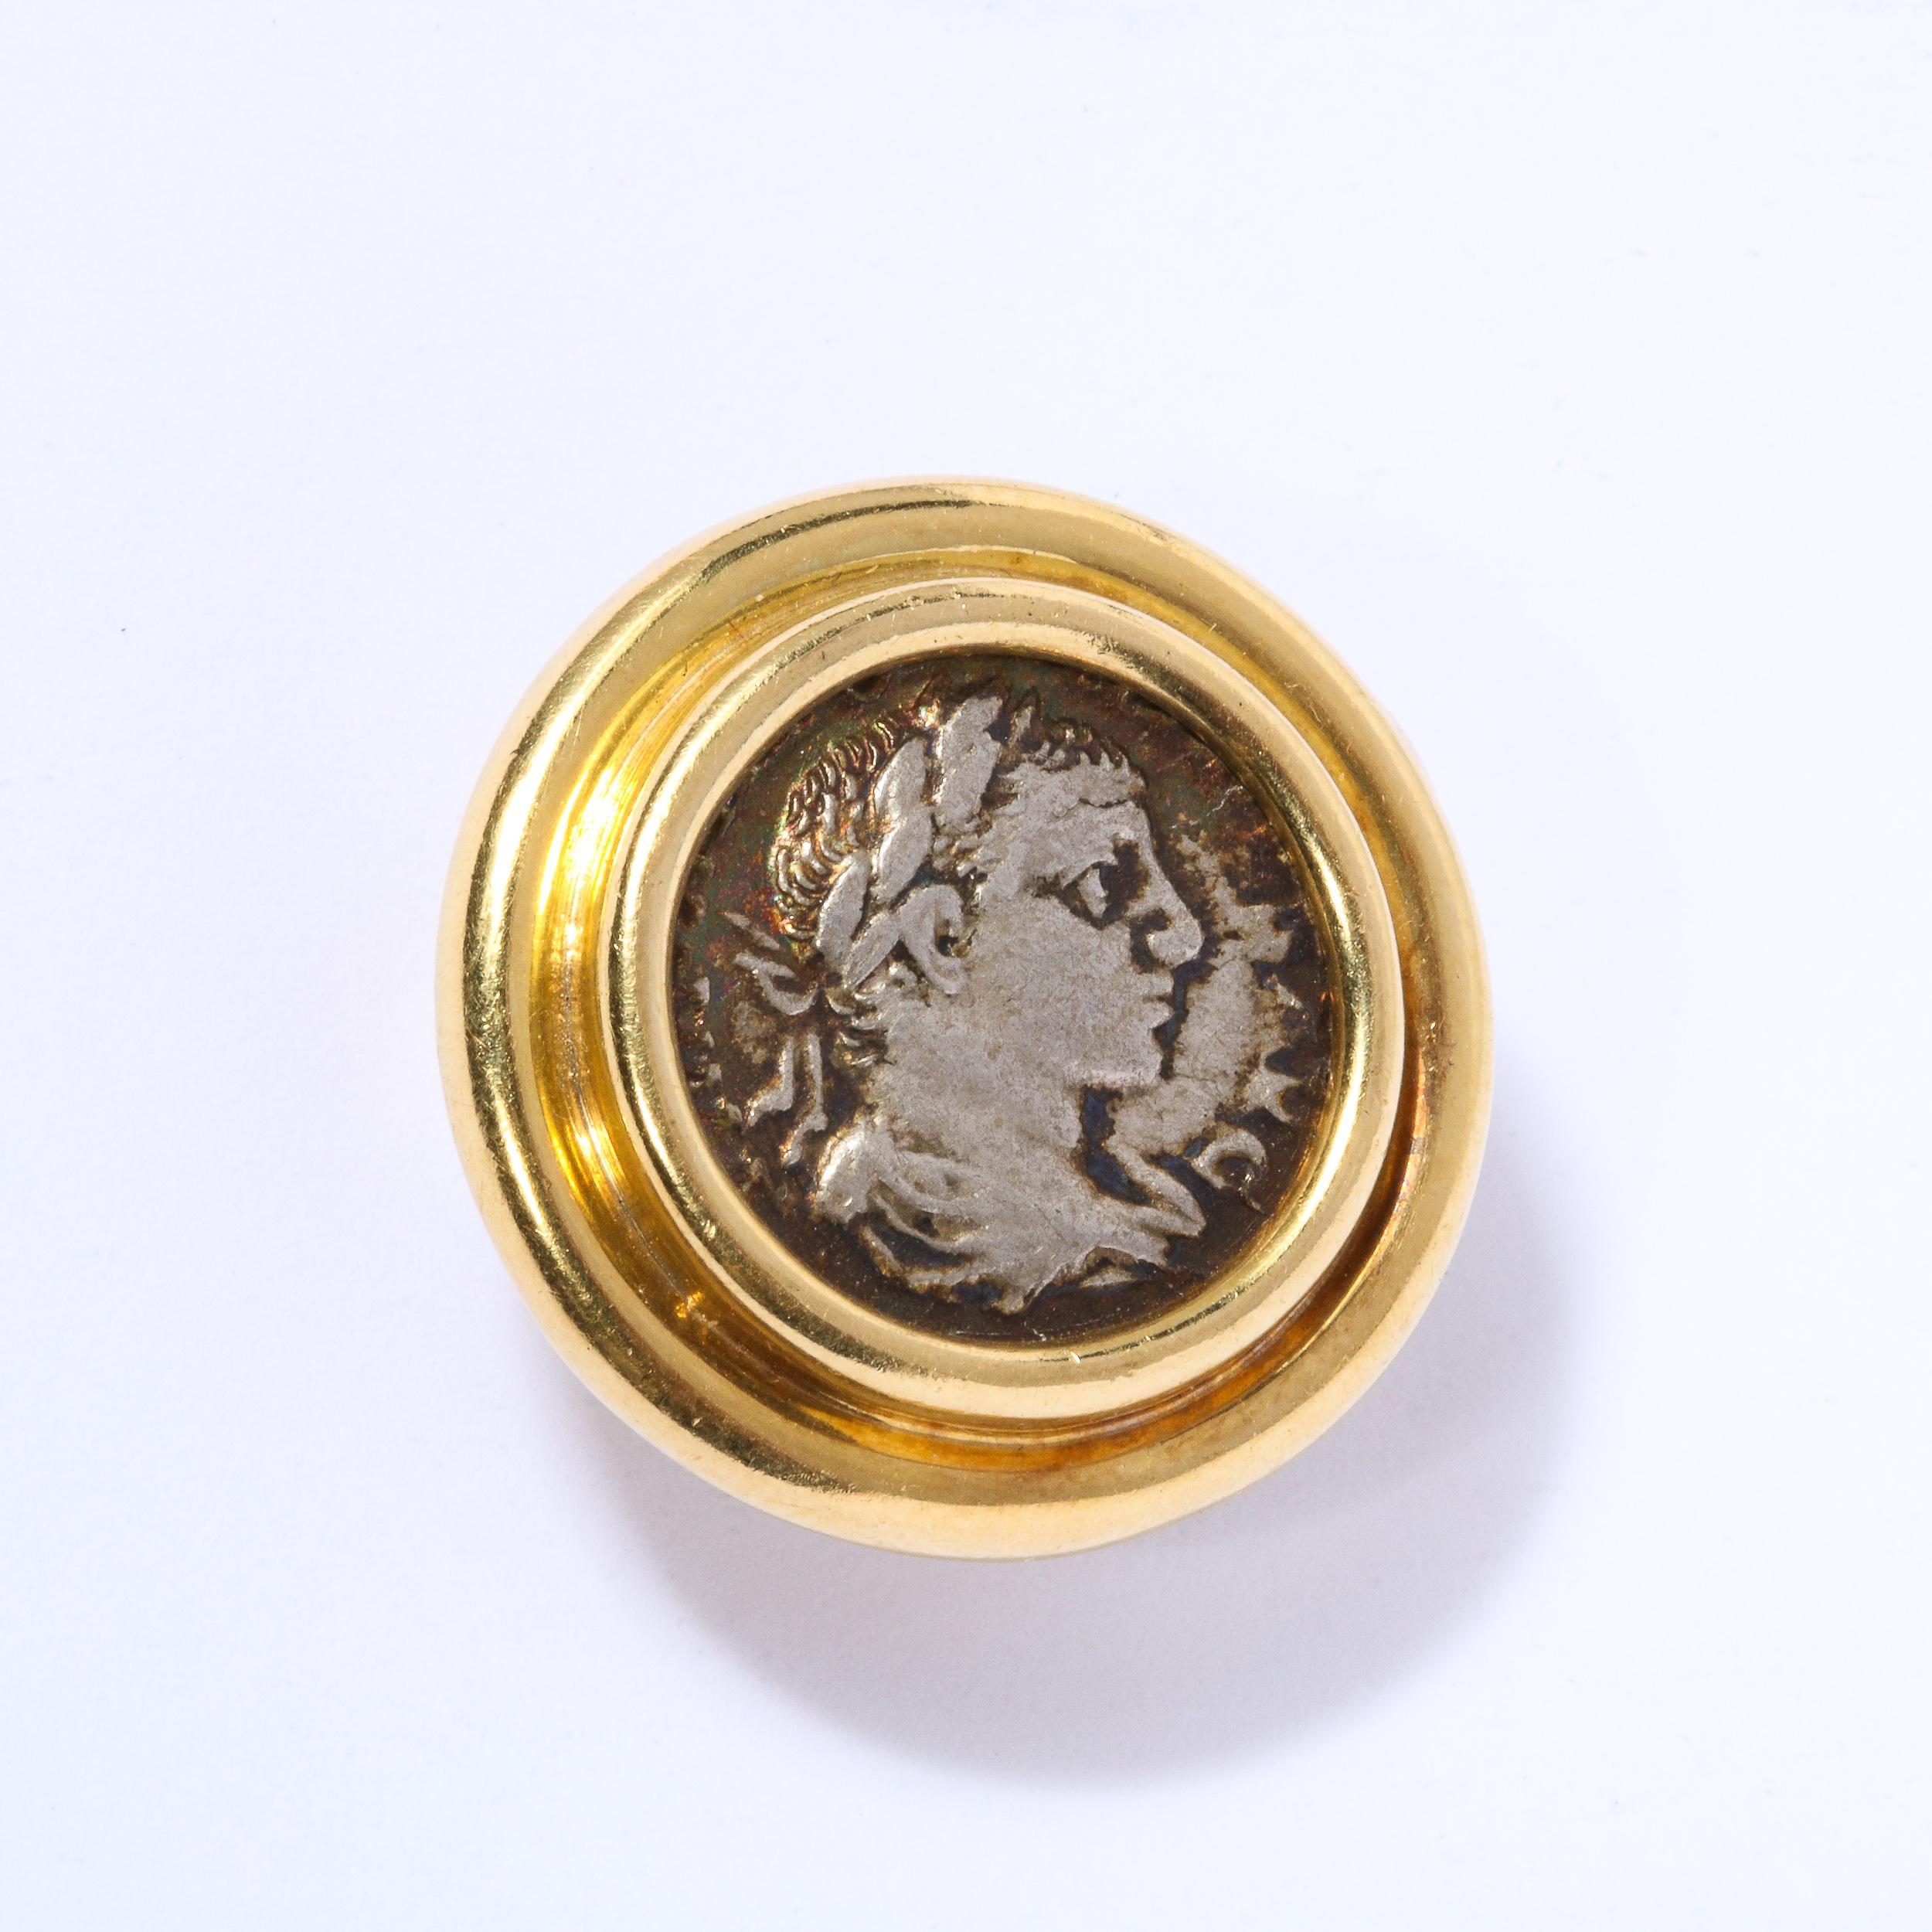 Italian Modernist Slide Pendant with Ancient Roman Figurative Coin in 18kt gold In Excellent Condition For Sale In New York, NY